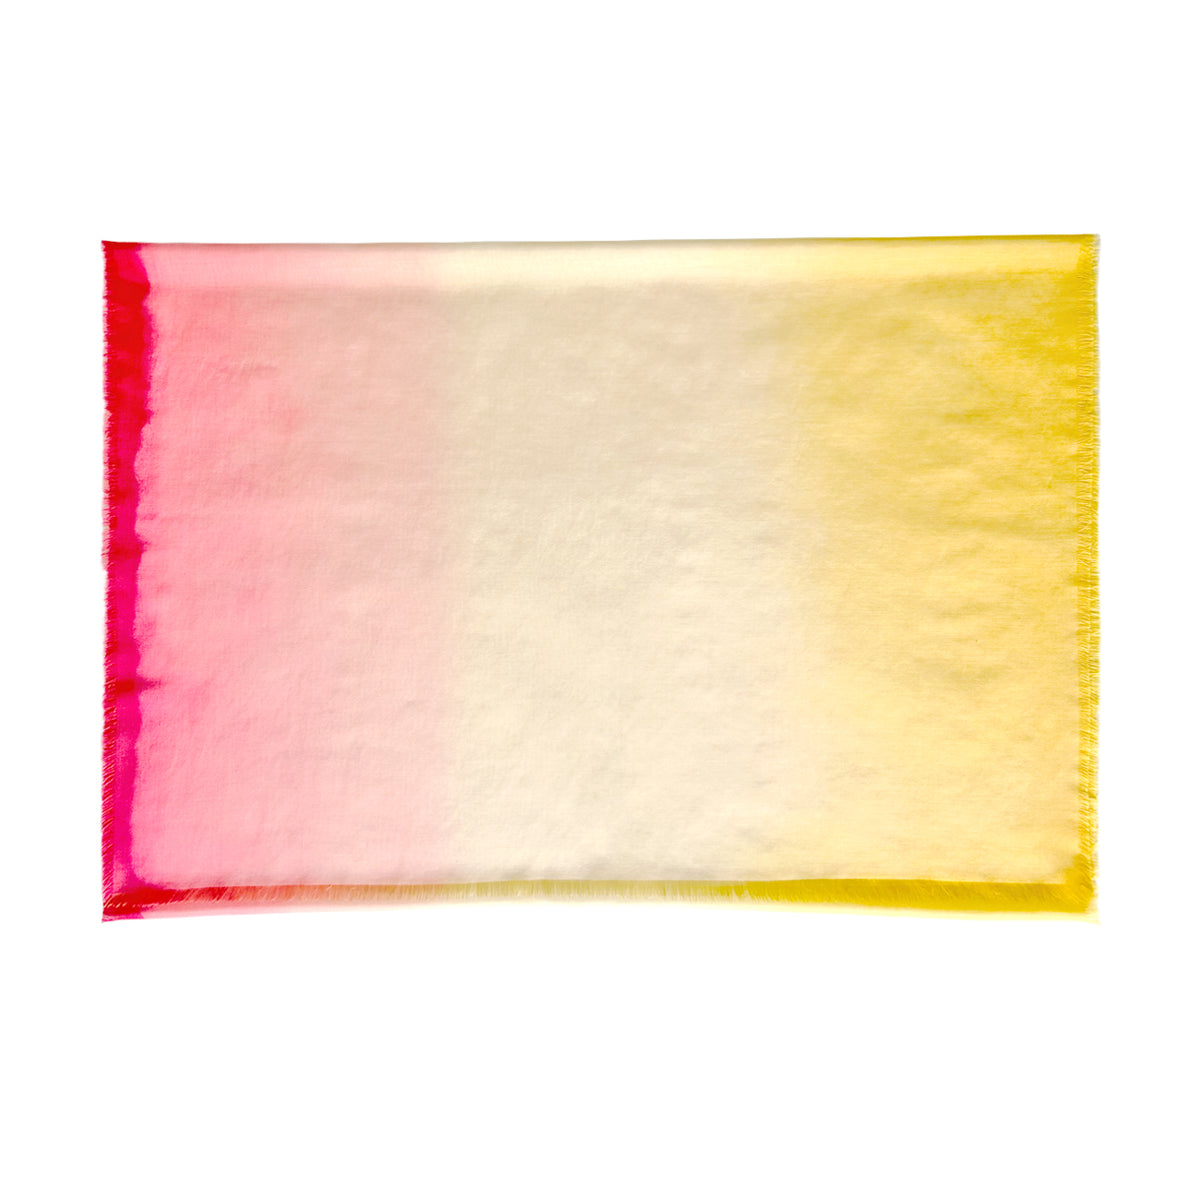 cotton-silk-scarf-hand-painted-190x70cm-yellow-pink-otta-italy-2312